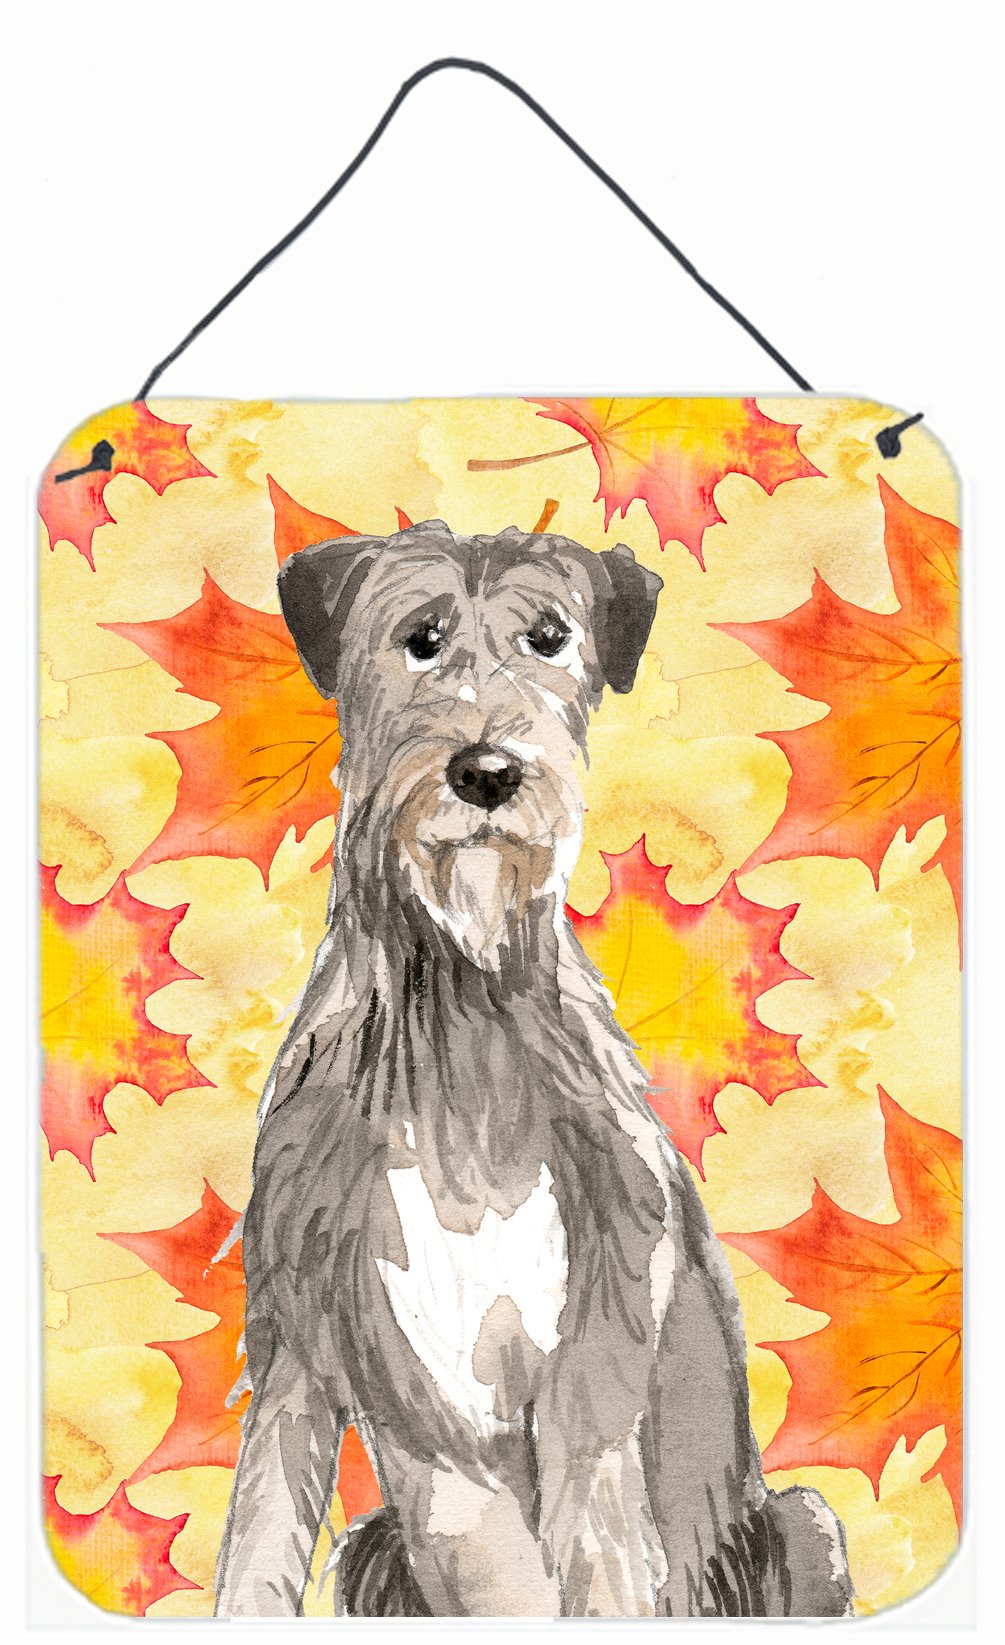 Fall Leaves Irish Wolfhound Wall or Door Hanging Prints CK1839DS1216 by Caroline's Treasures